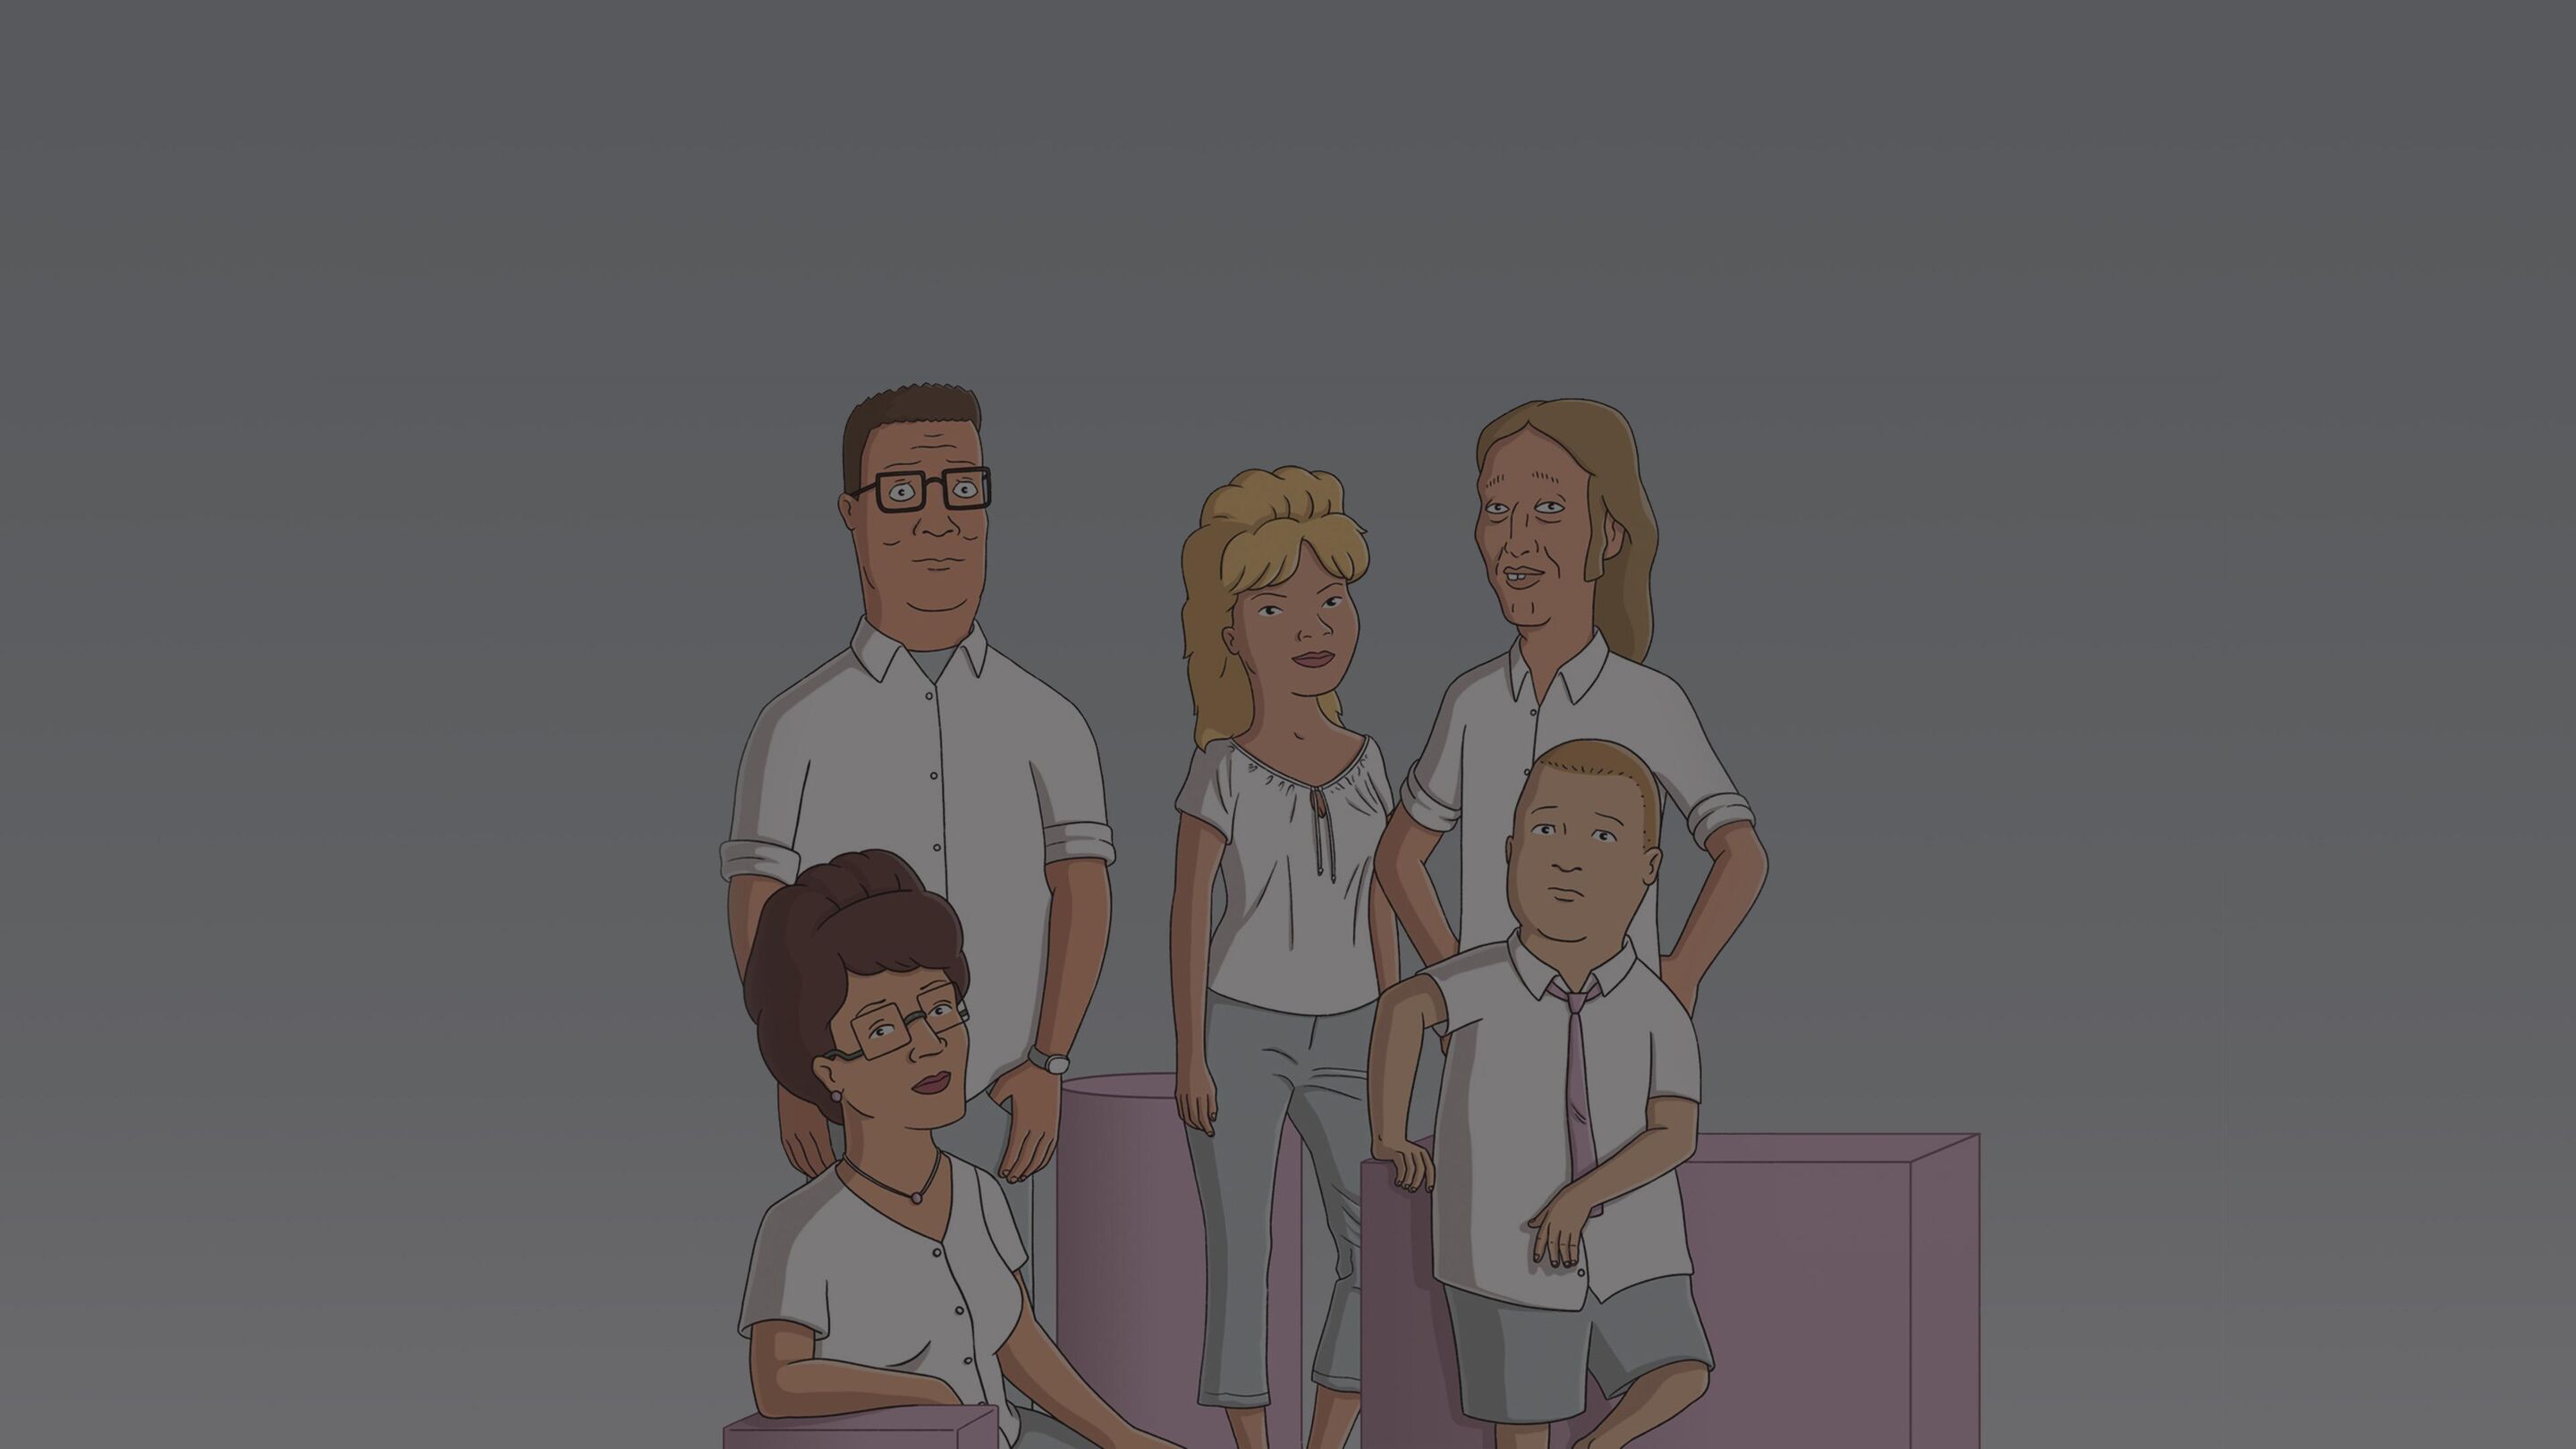 Watch King of the Hill TV Show - Streaming Online